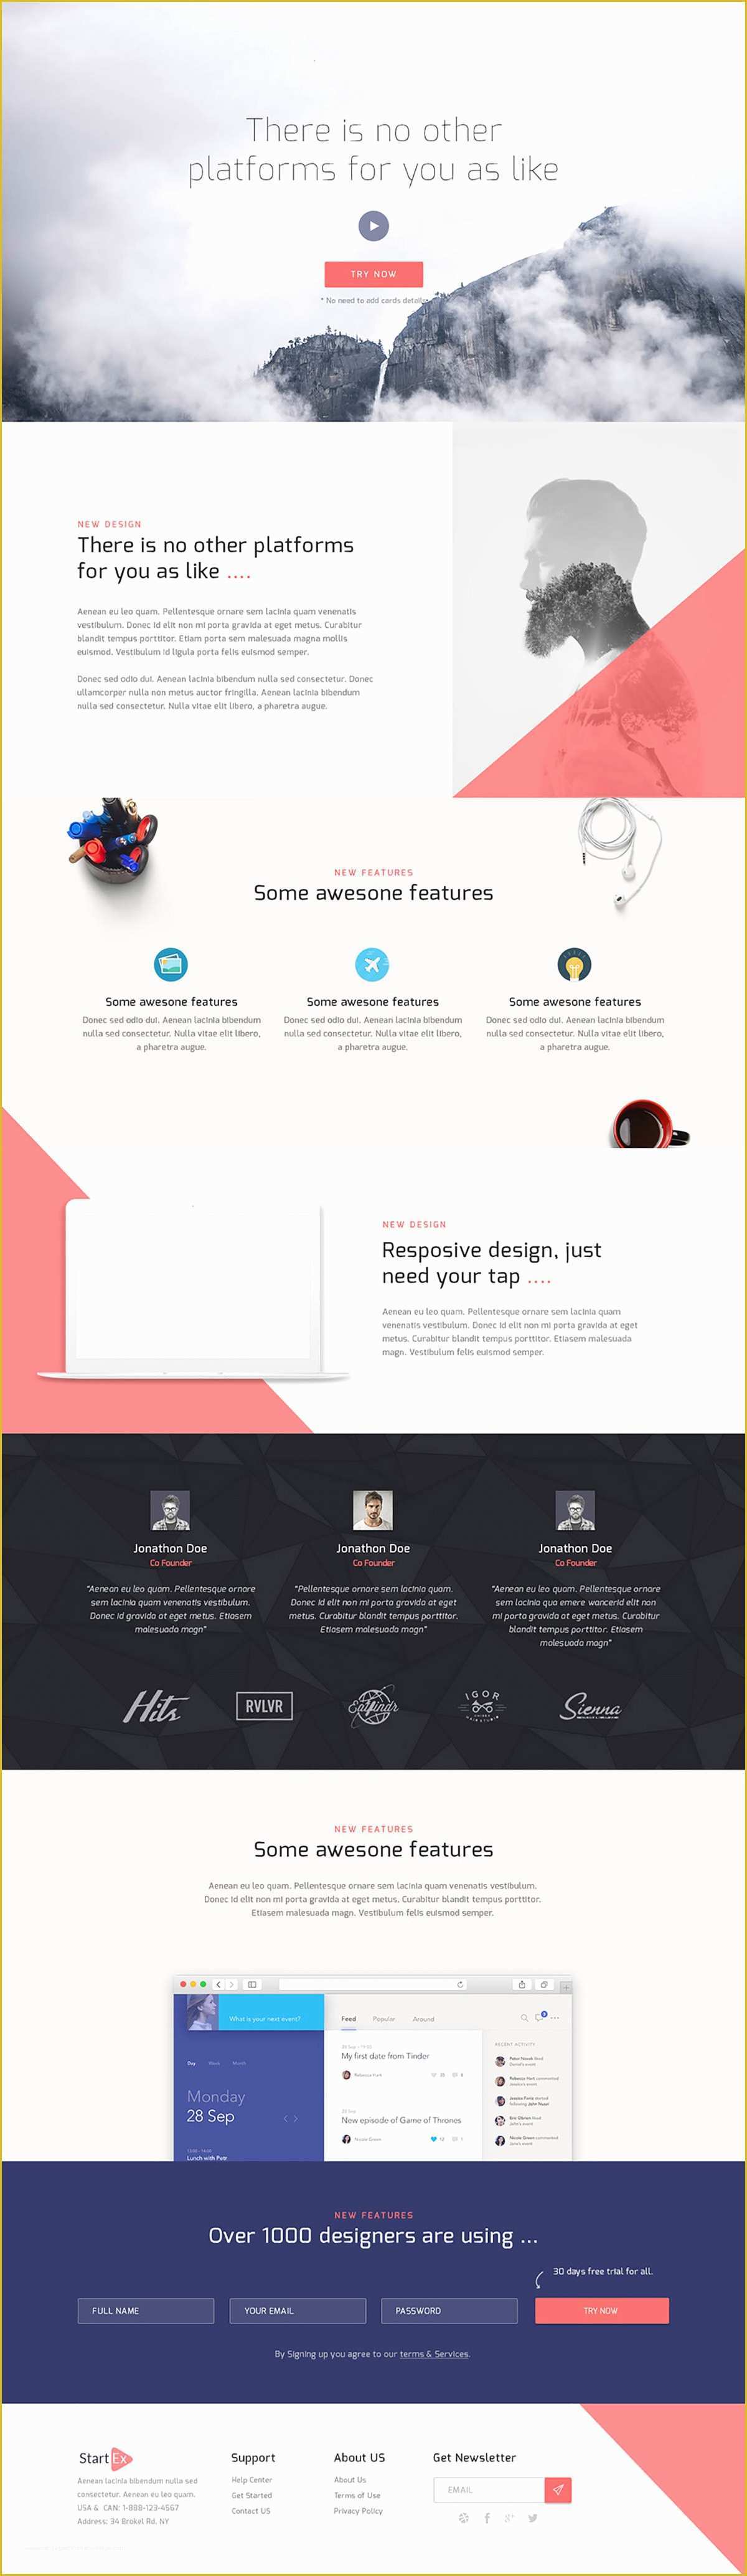 Free Psd Website Templates Of 20 Beautiful Psd Templates You Can Download for Free